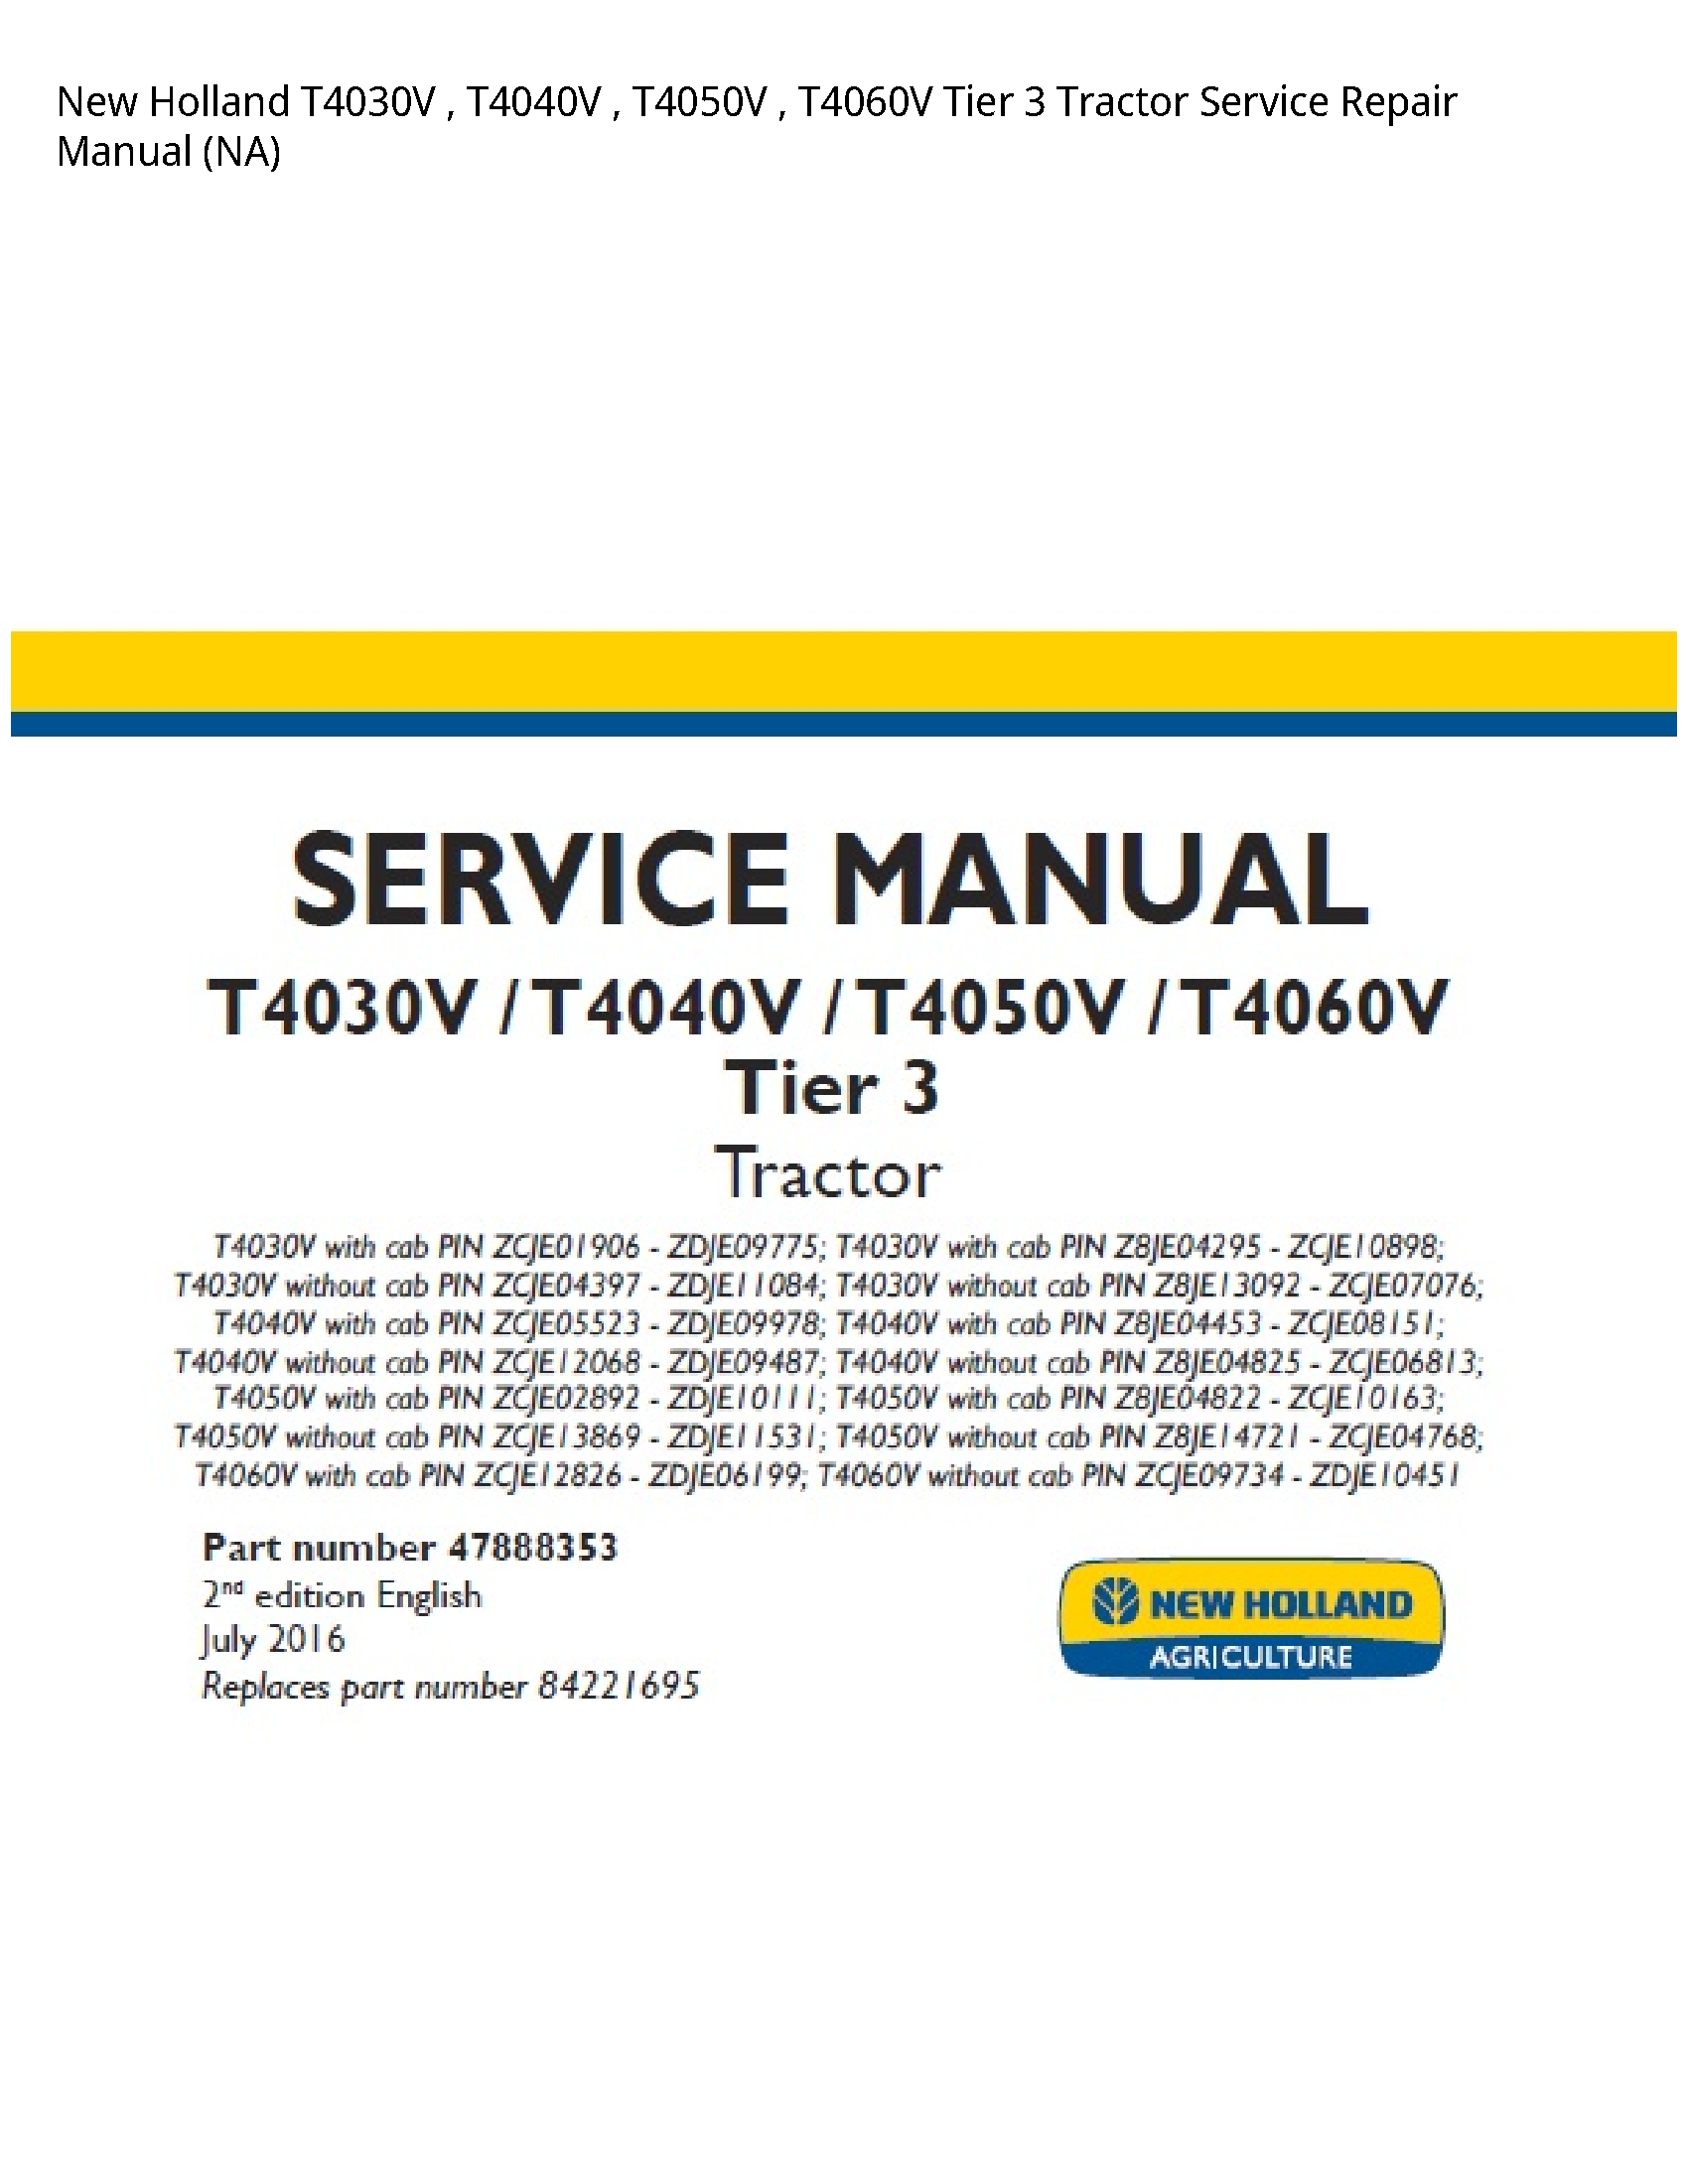 New Holland T4030V Tier Tractor manual